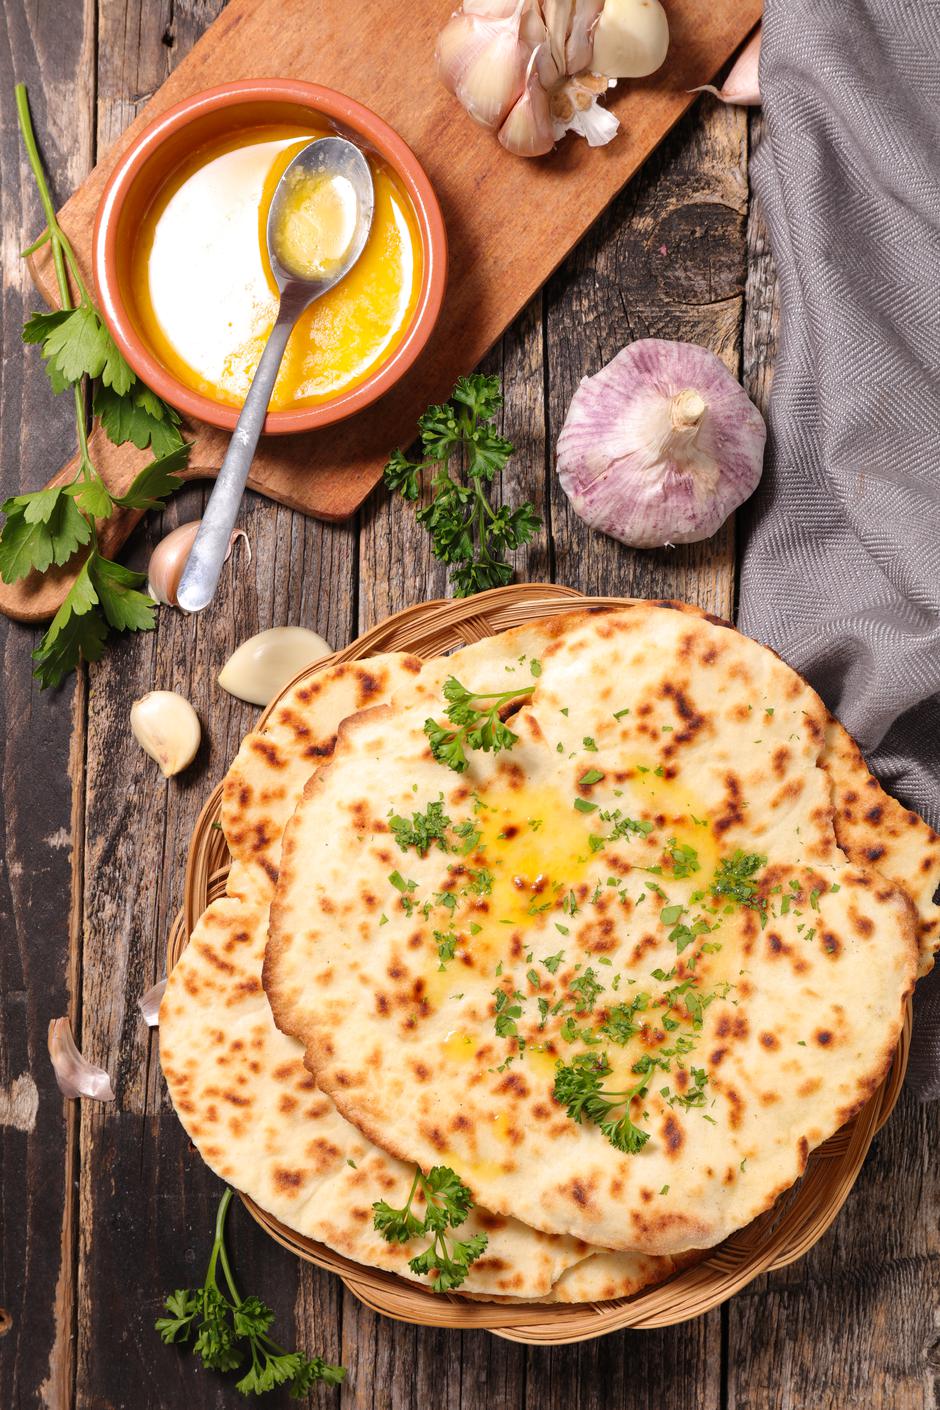 Naan | Author: Getty Images